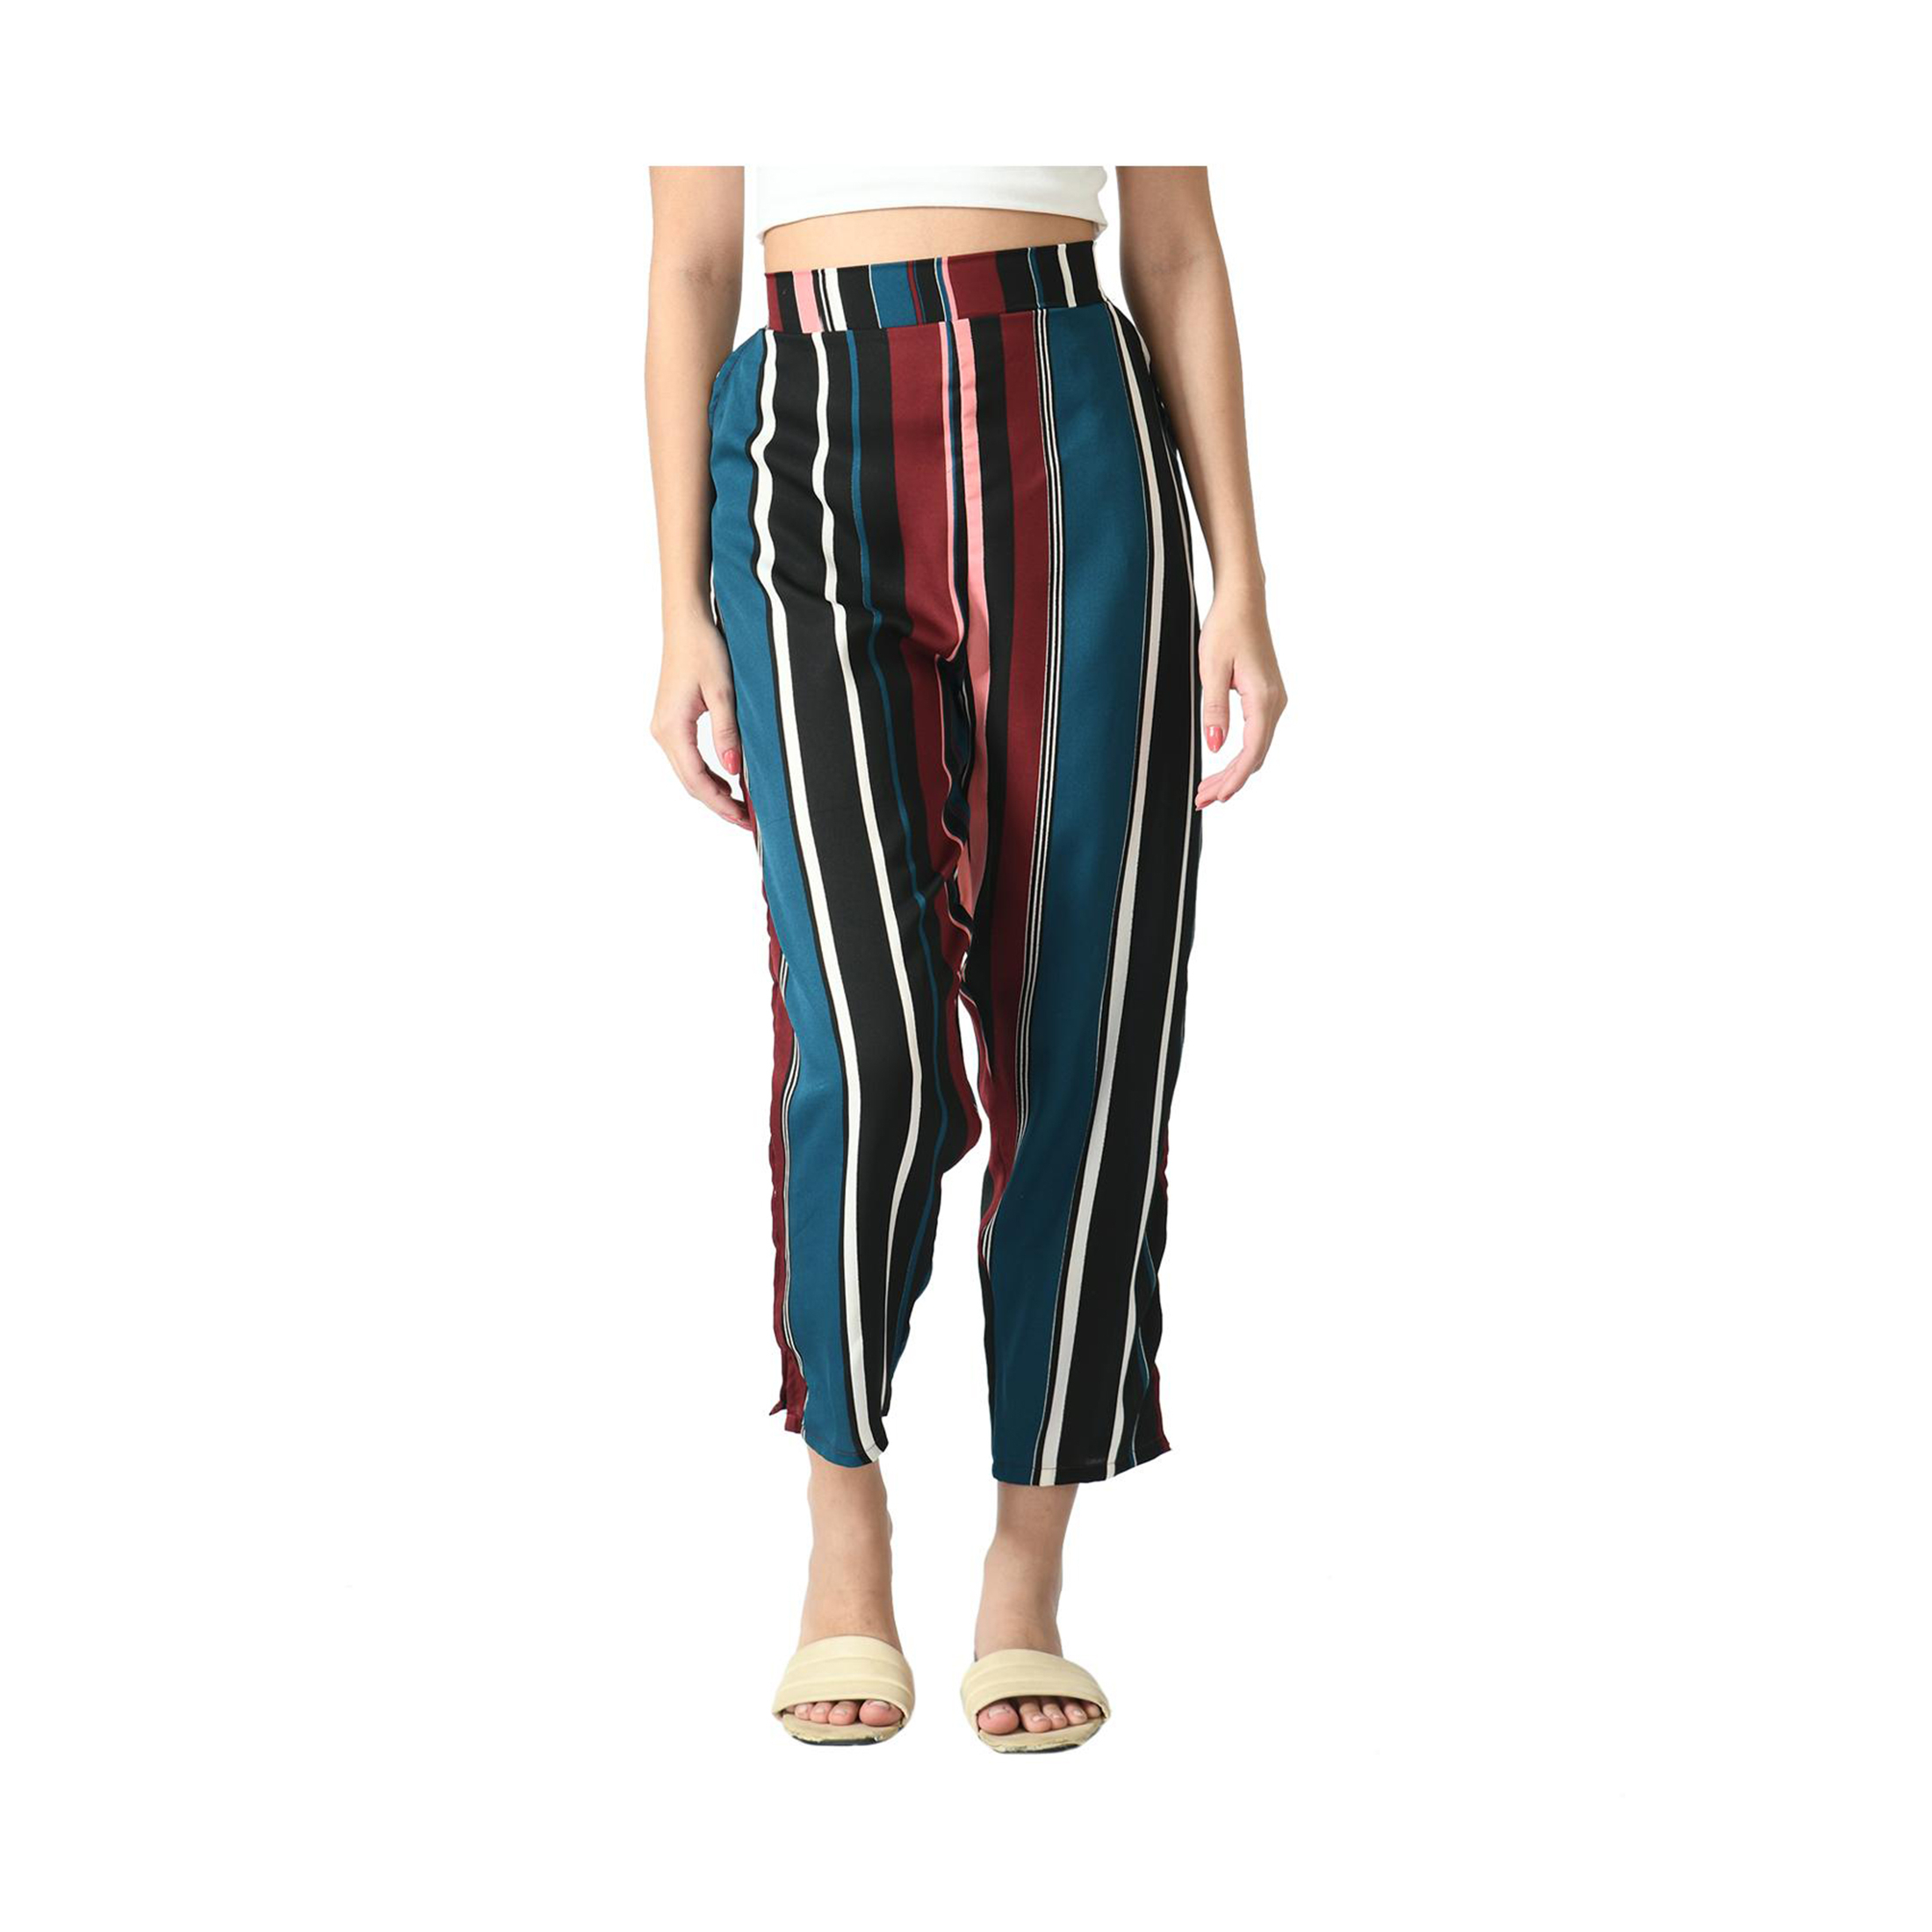 3-Pack: Ladies Striped High Waisted Summer Soft Wide Open Boho Leg Palazzo Pants - X-Large